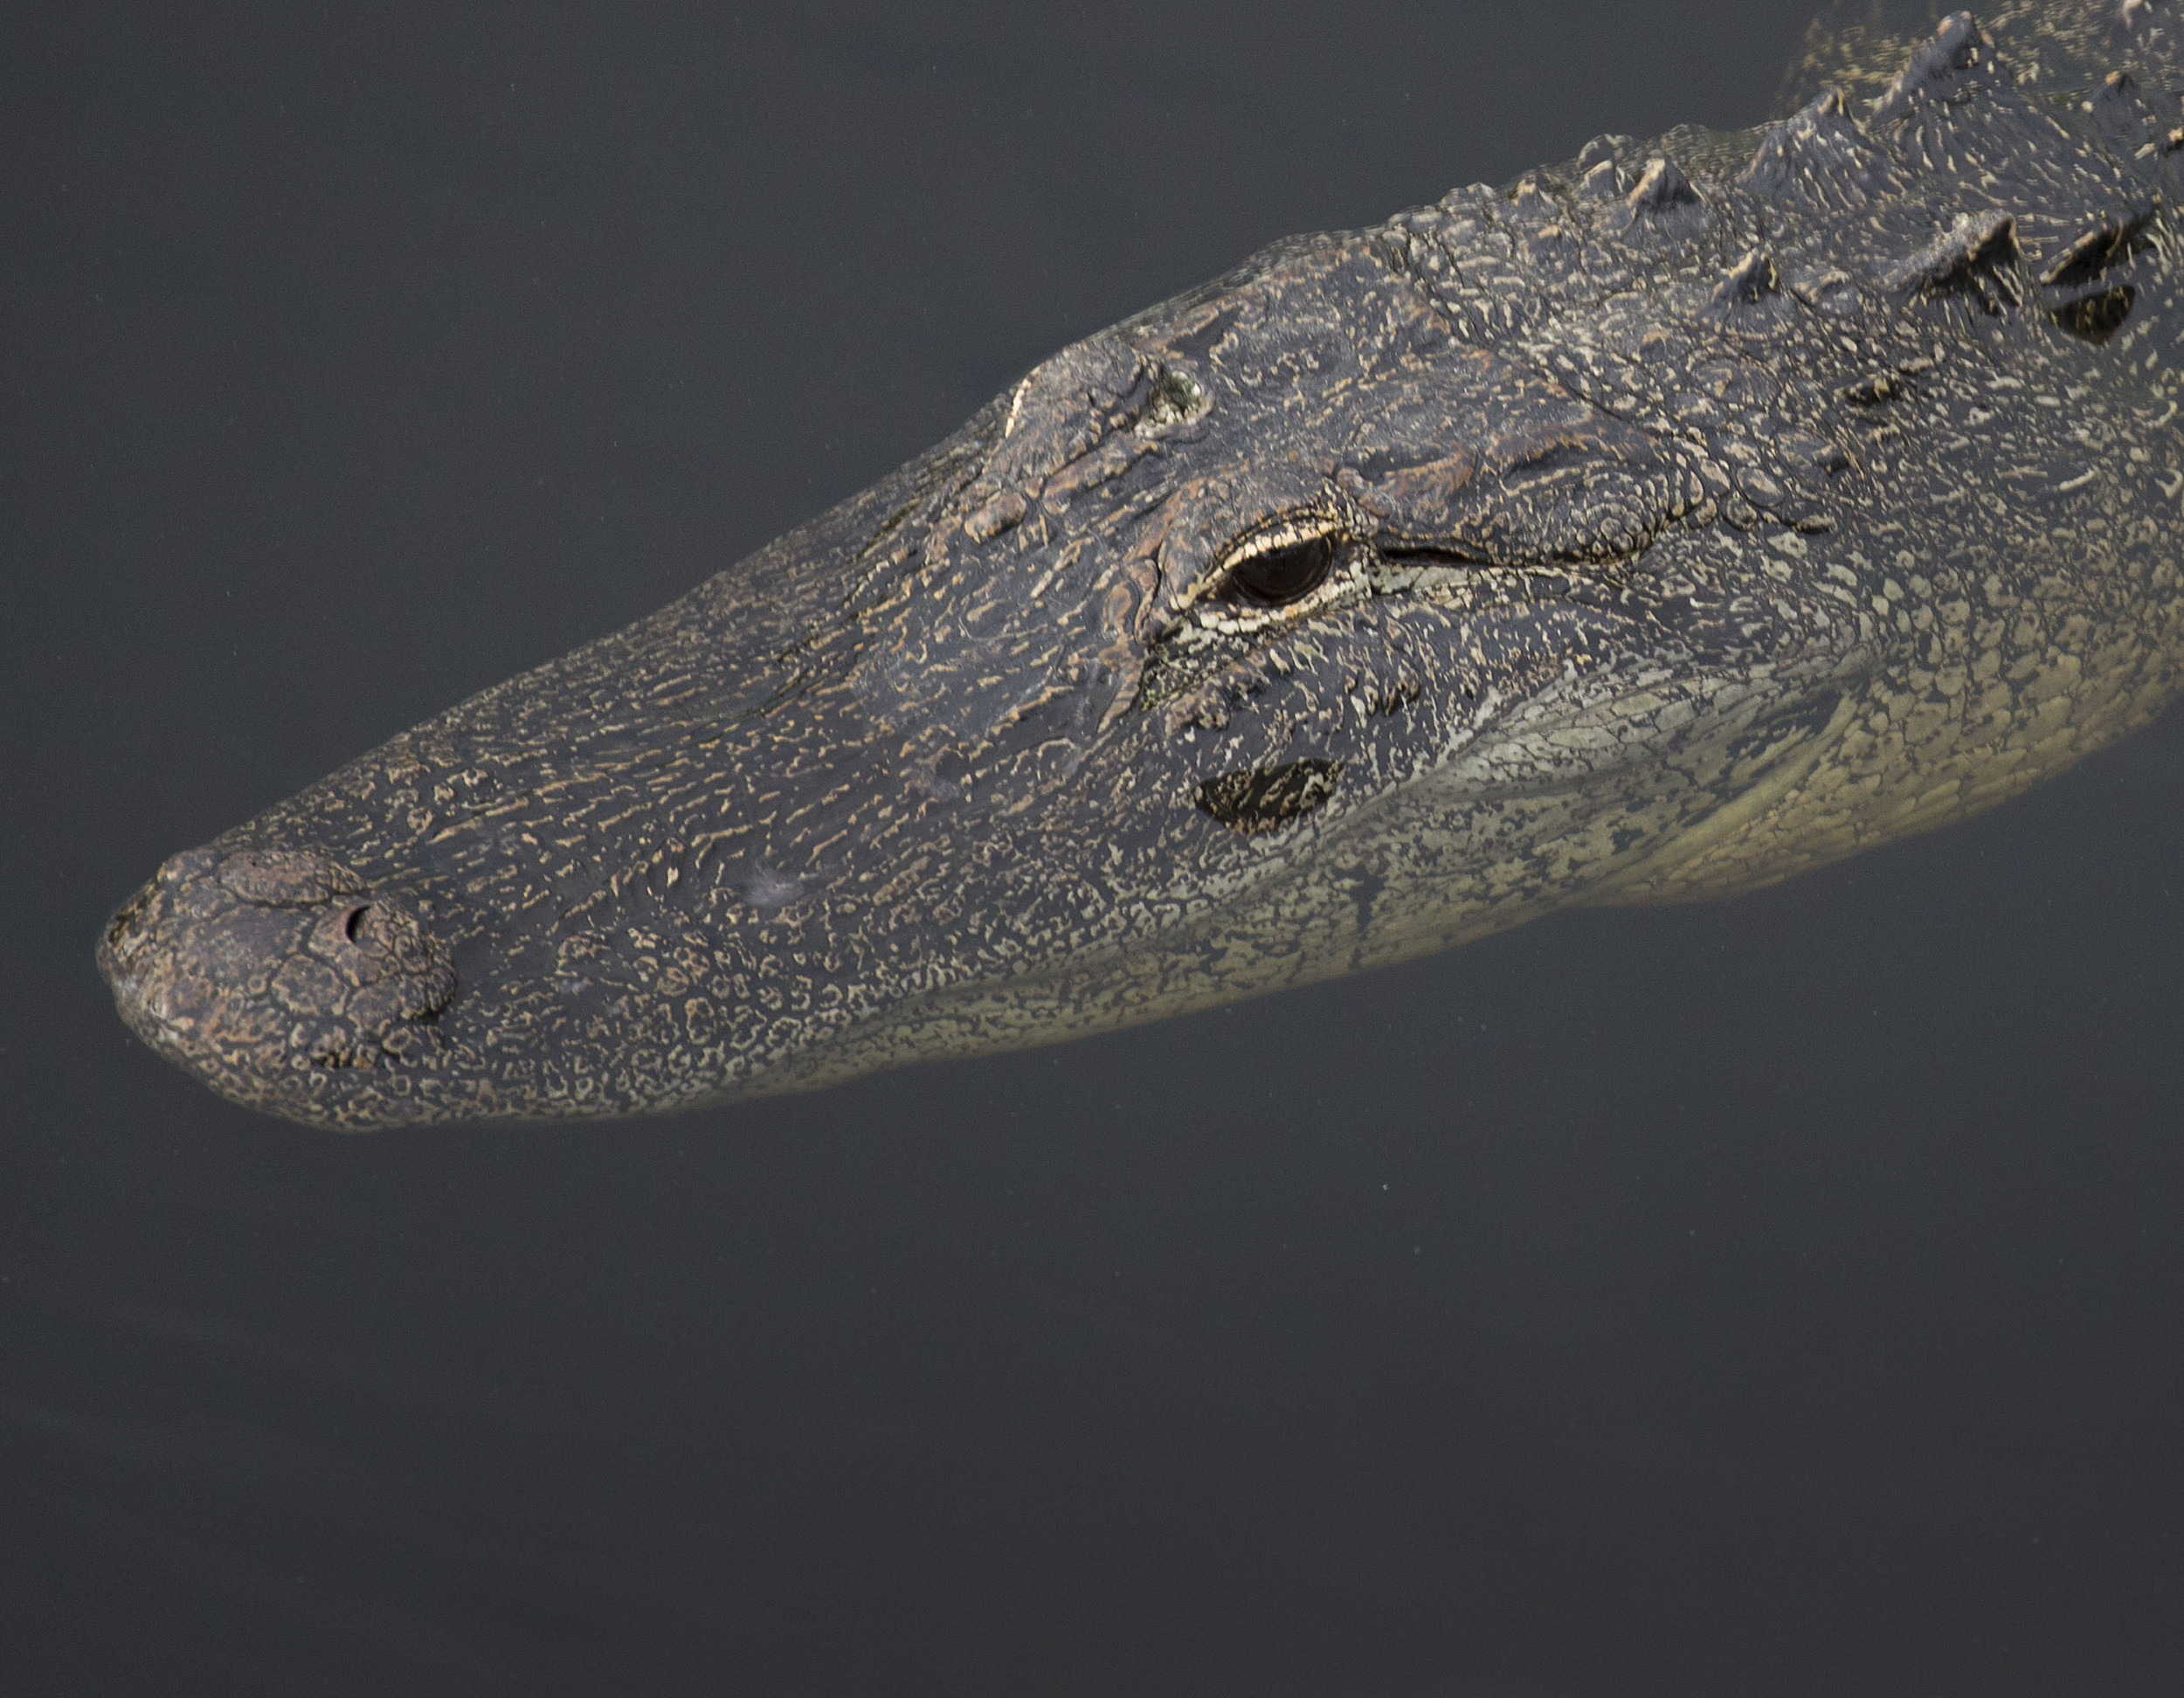 Decapitated Alligator Found In Florida For Second Time In A Month